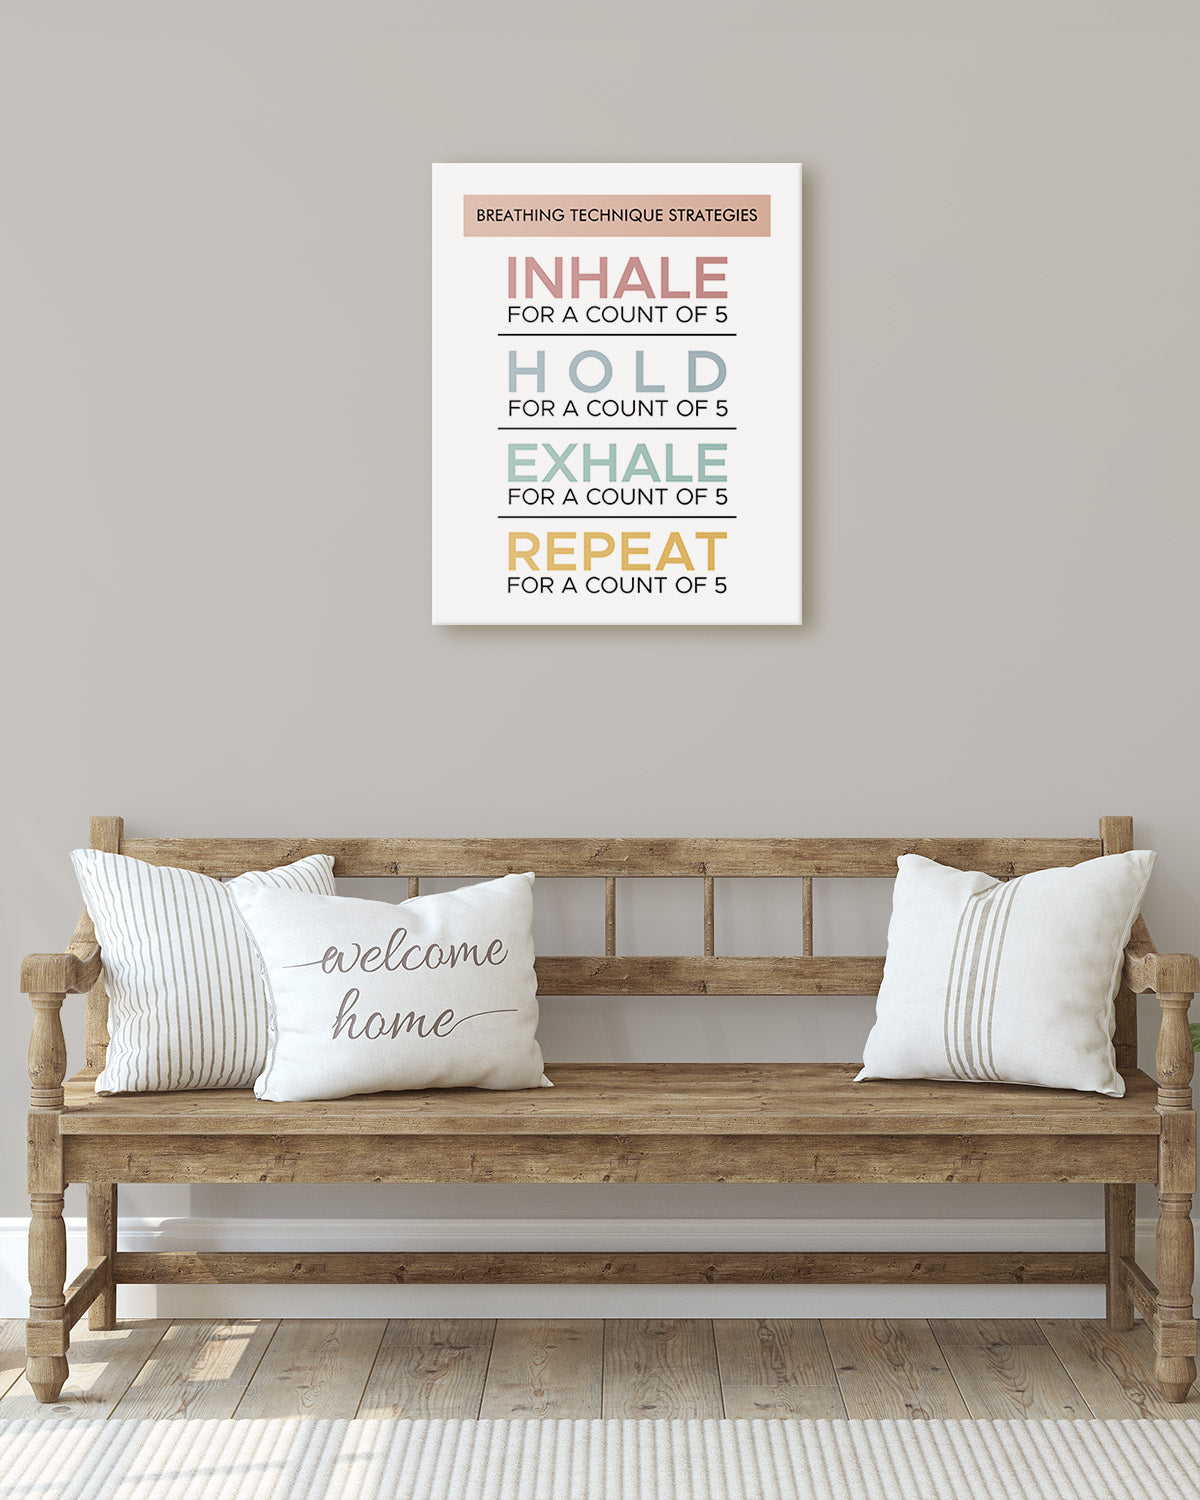 Govivo Breathing Technique Strategies - Wall Decor for Therapy Office - Mindfulness Wall Decor - Counseling Office - Mental Health Wall Art - School Psychologist, Therapist